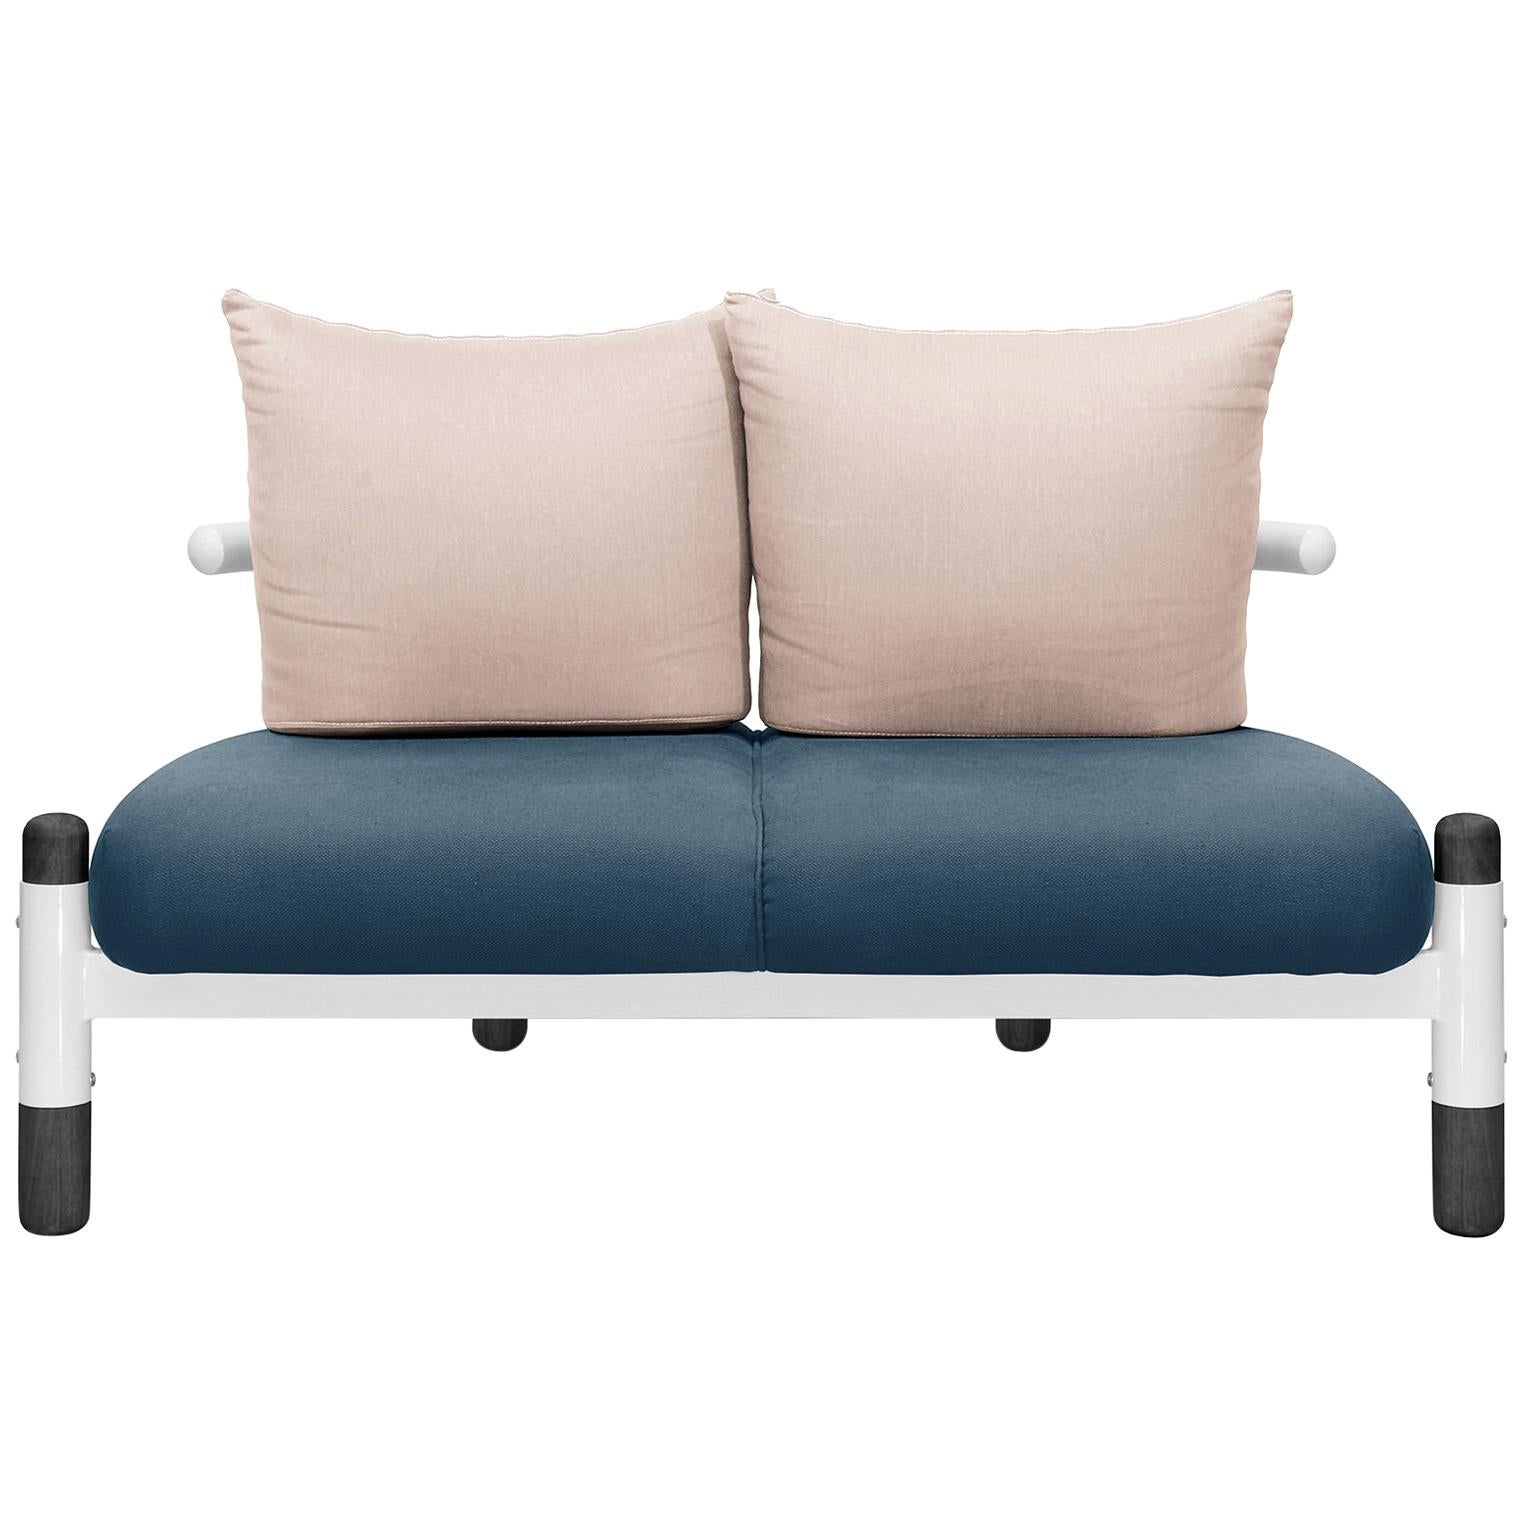 Blue PK15 Two-Seat Sofa, Steel Structure and Ebonized Wood Legs by Paulo Kobylka